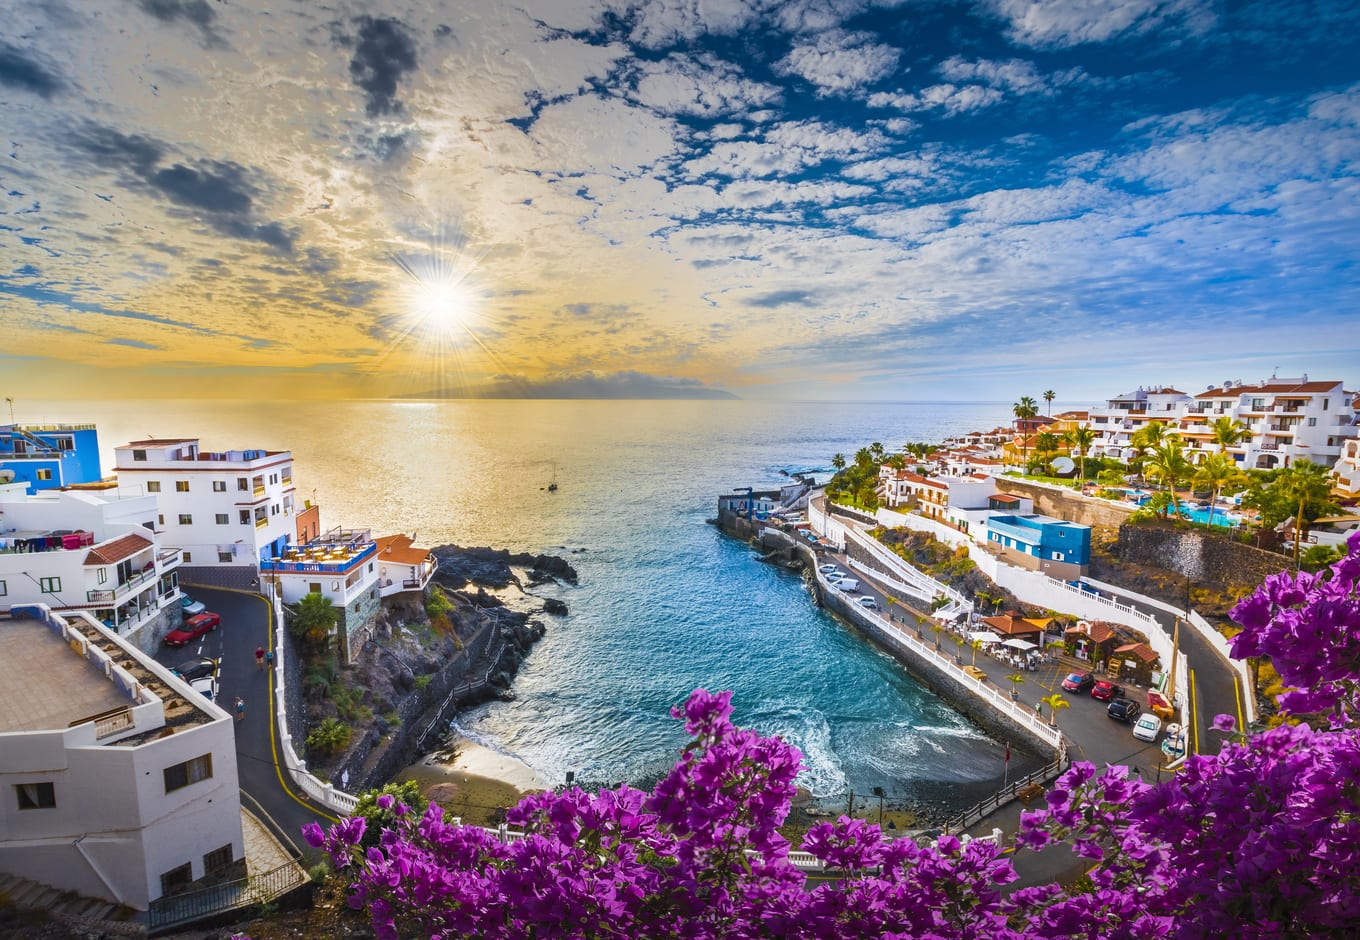 Sunset at Tenerife, Canary Islands.